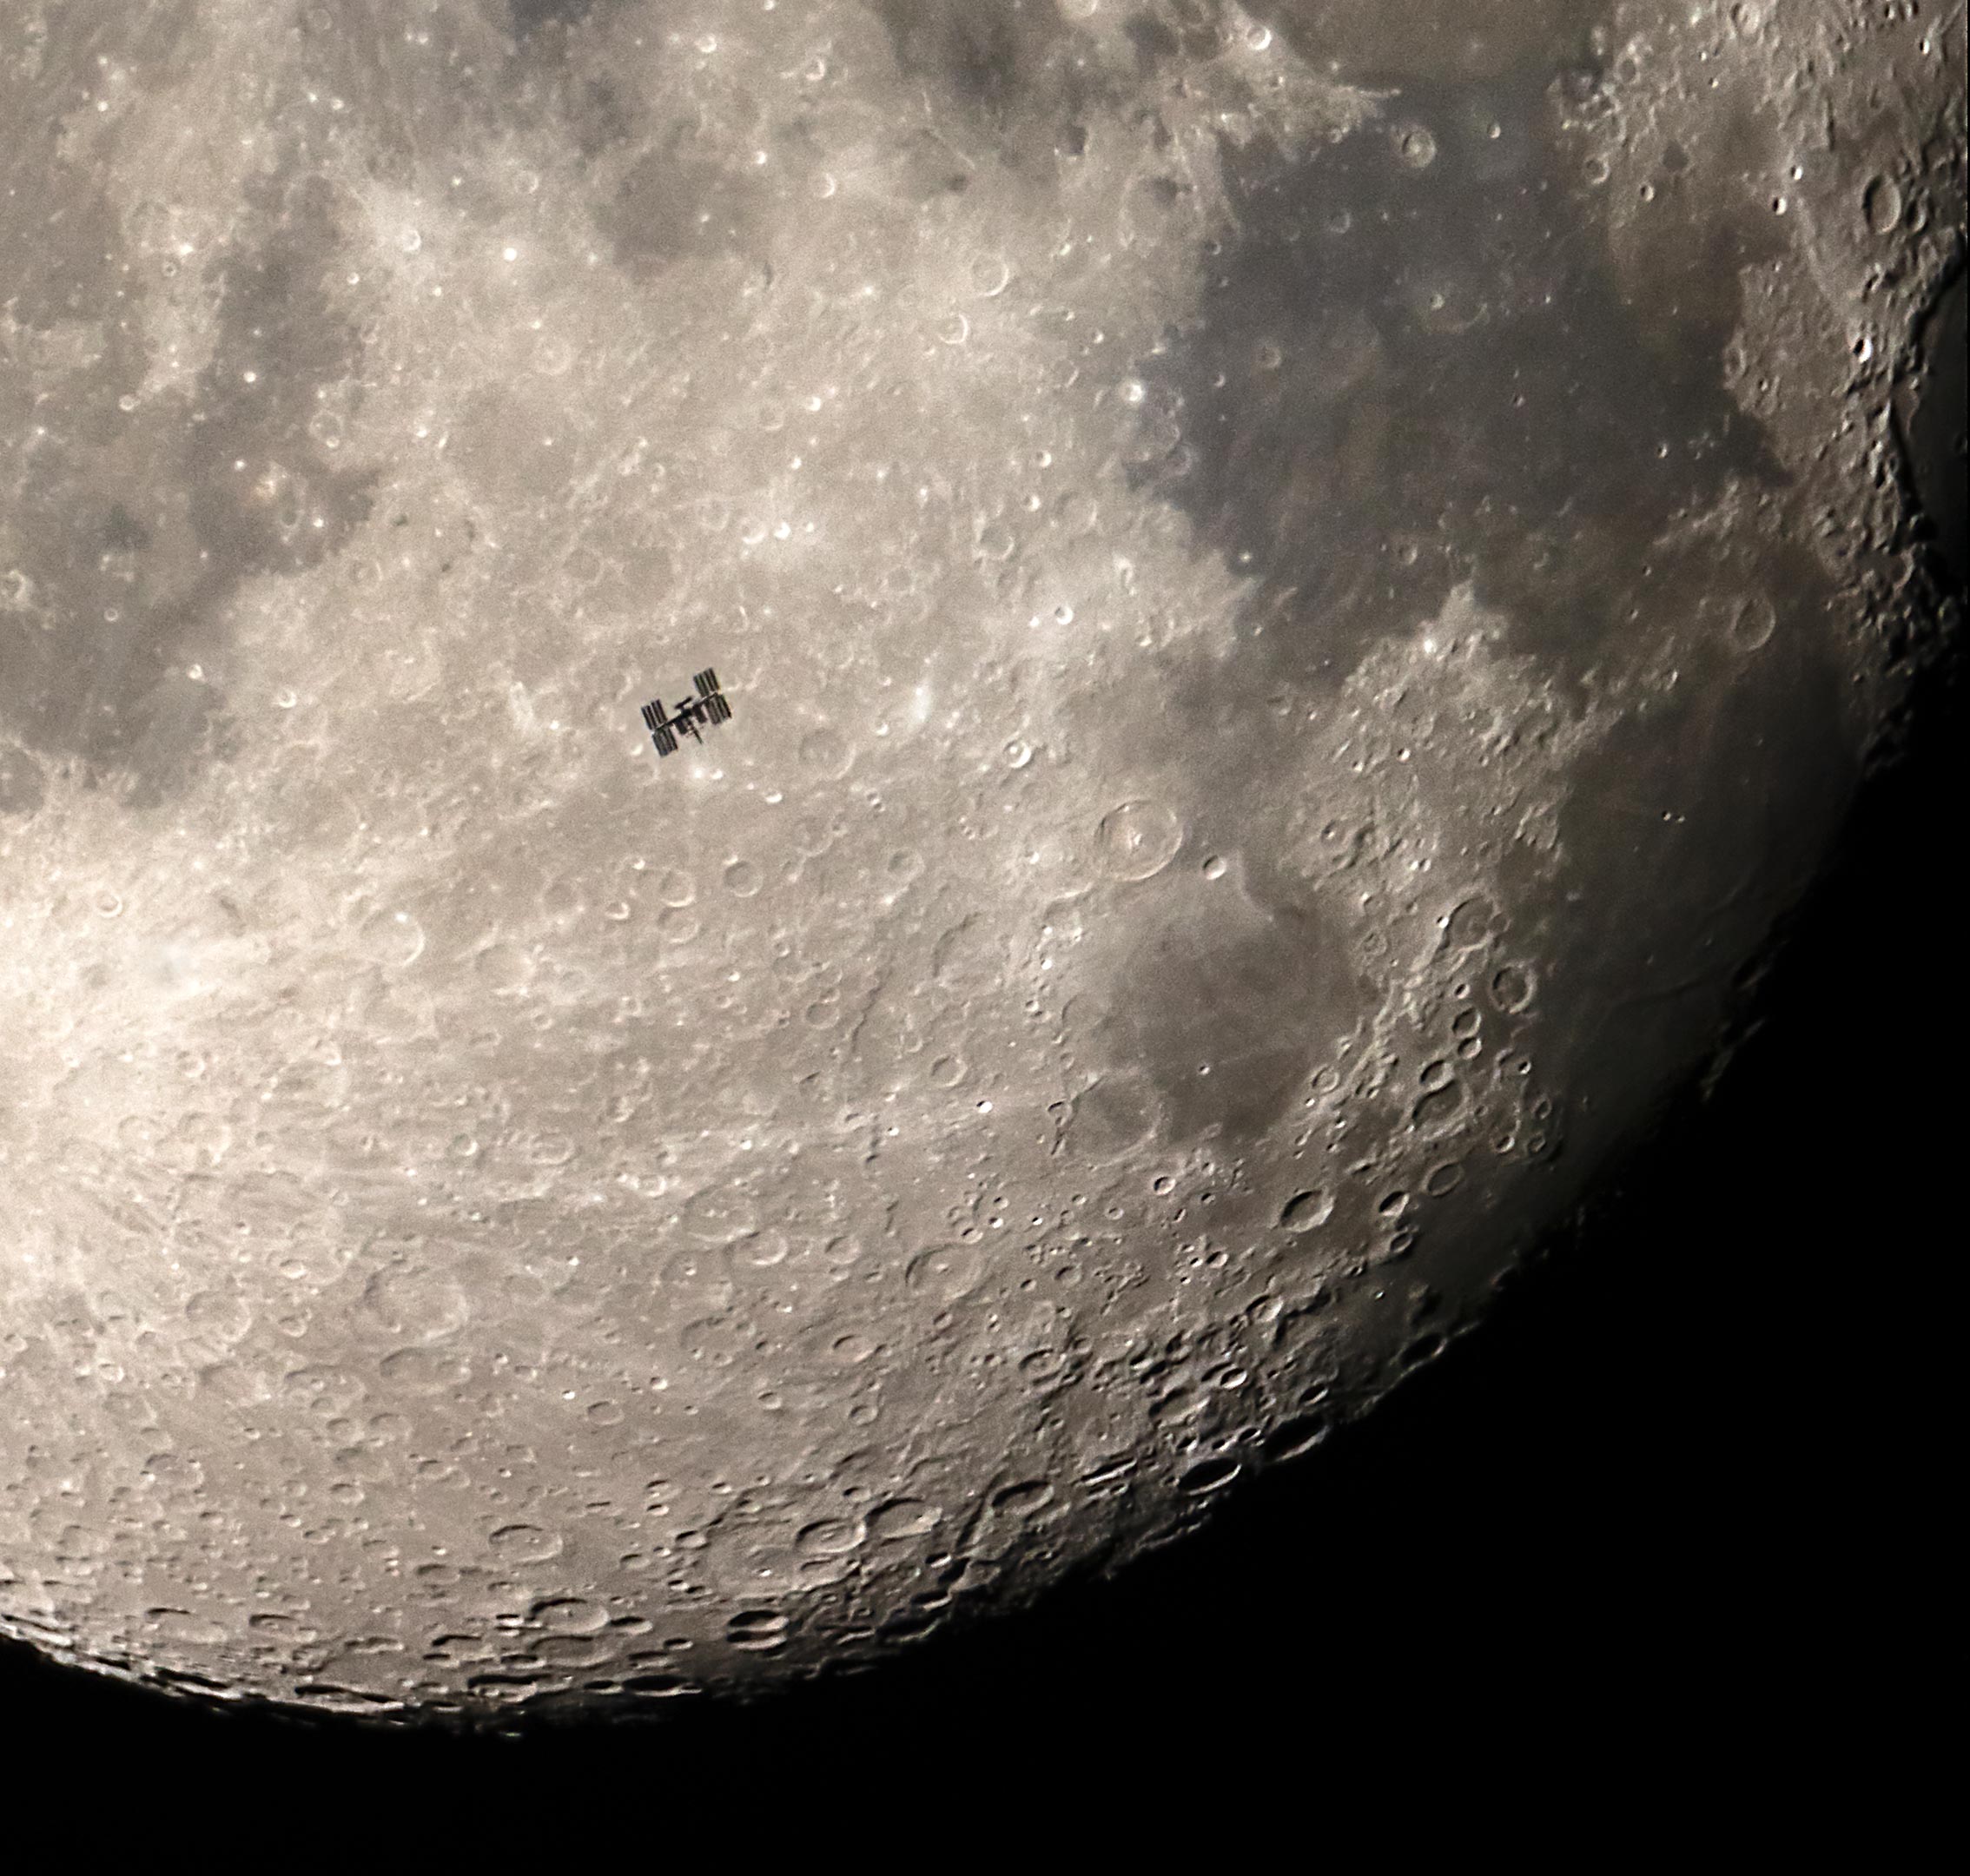 int space station moon